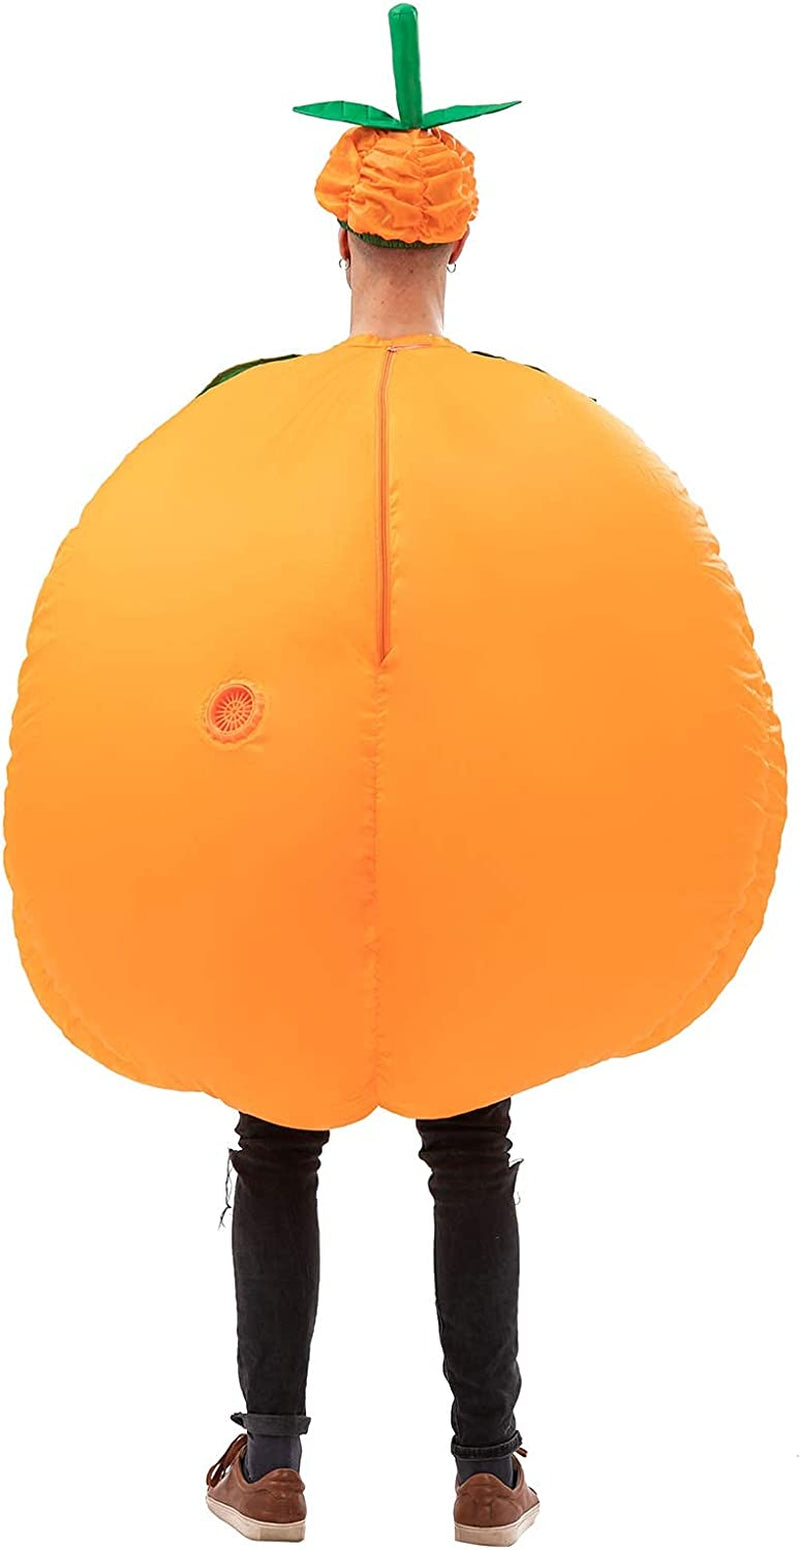 Inflatable Pumpkin Costume for Adults 4.9-5.9Ft  Does Not Apply   